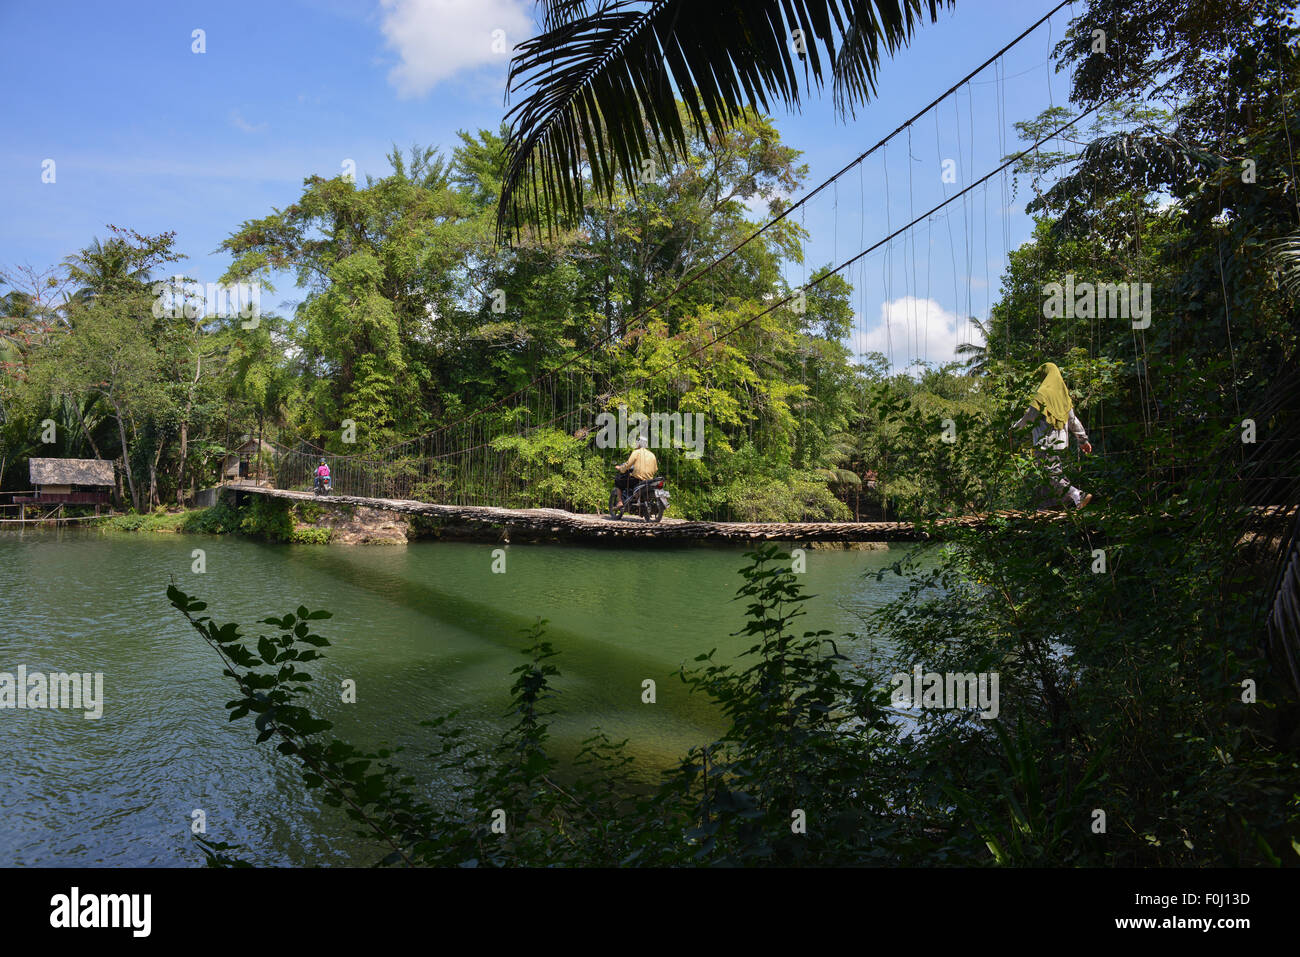 People cross what is know as the bamboo bridge, a suspension bridge made of bamboo, in Batukaras, West Java on 09 August 2015. Stock Photo